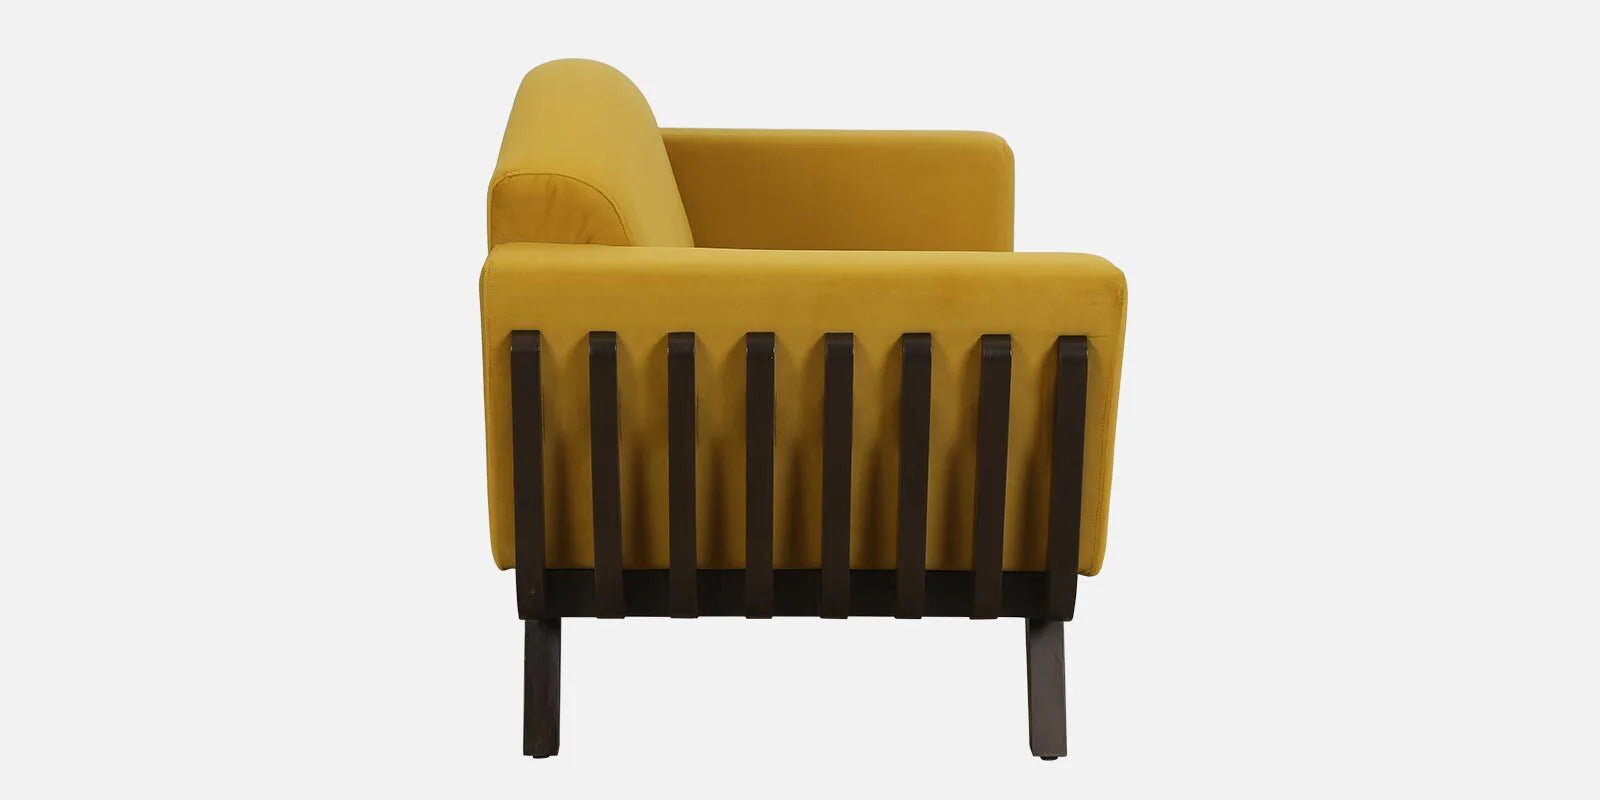 Solid Wood 2 Seater Sofa In Yellow Colour